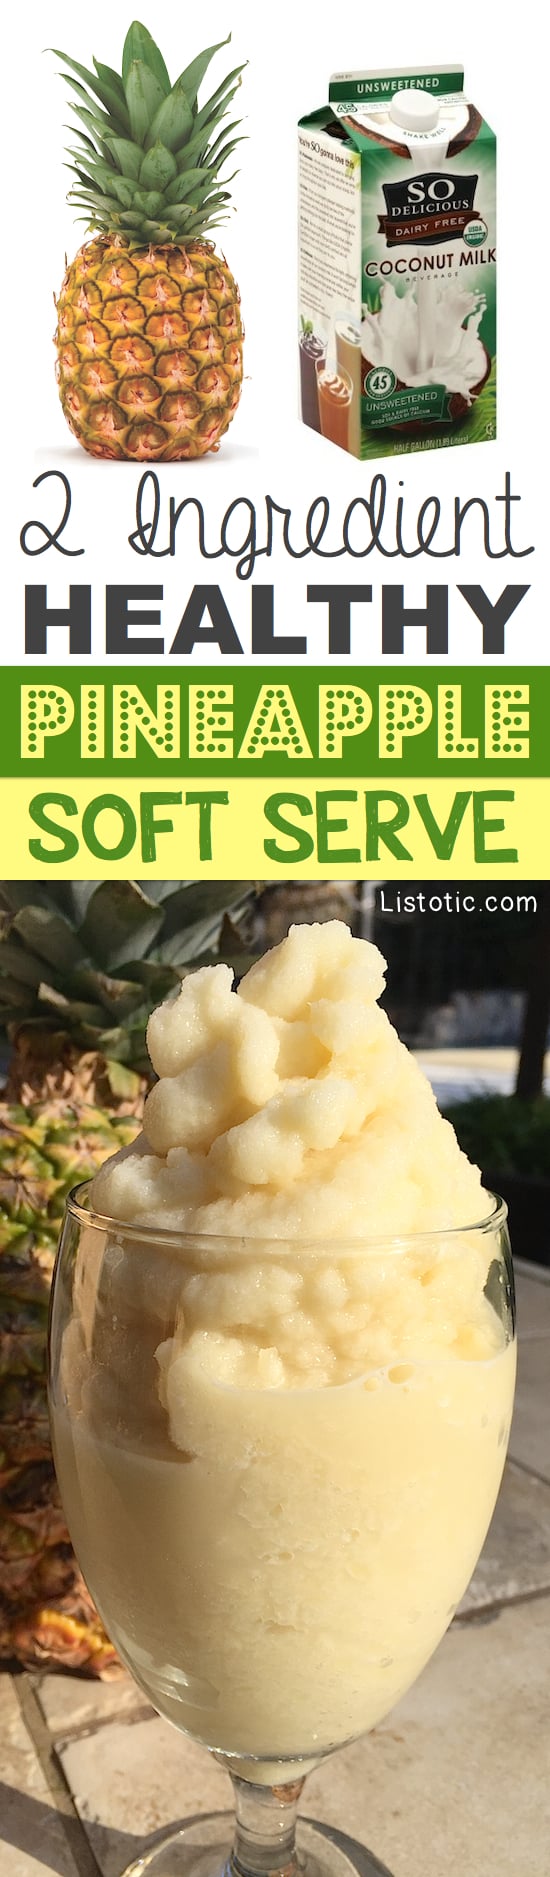 A 2 Ingredient, healthy pineapple soft serve like treat! This healthy snack recipe is similar to a smoothie but thicker and creamier. The perfect guilt-free, dairy-free dessert! | Listotic.com